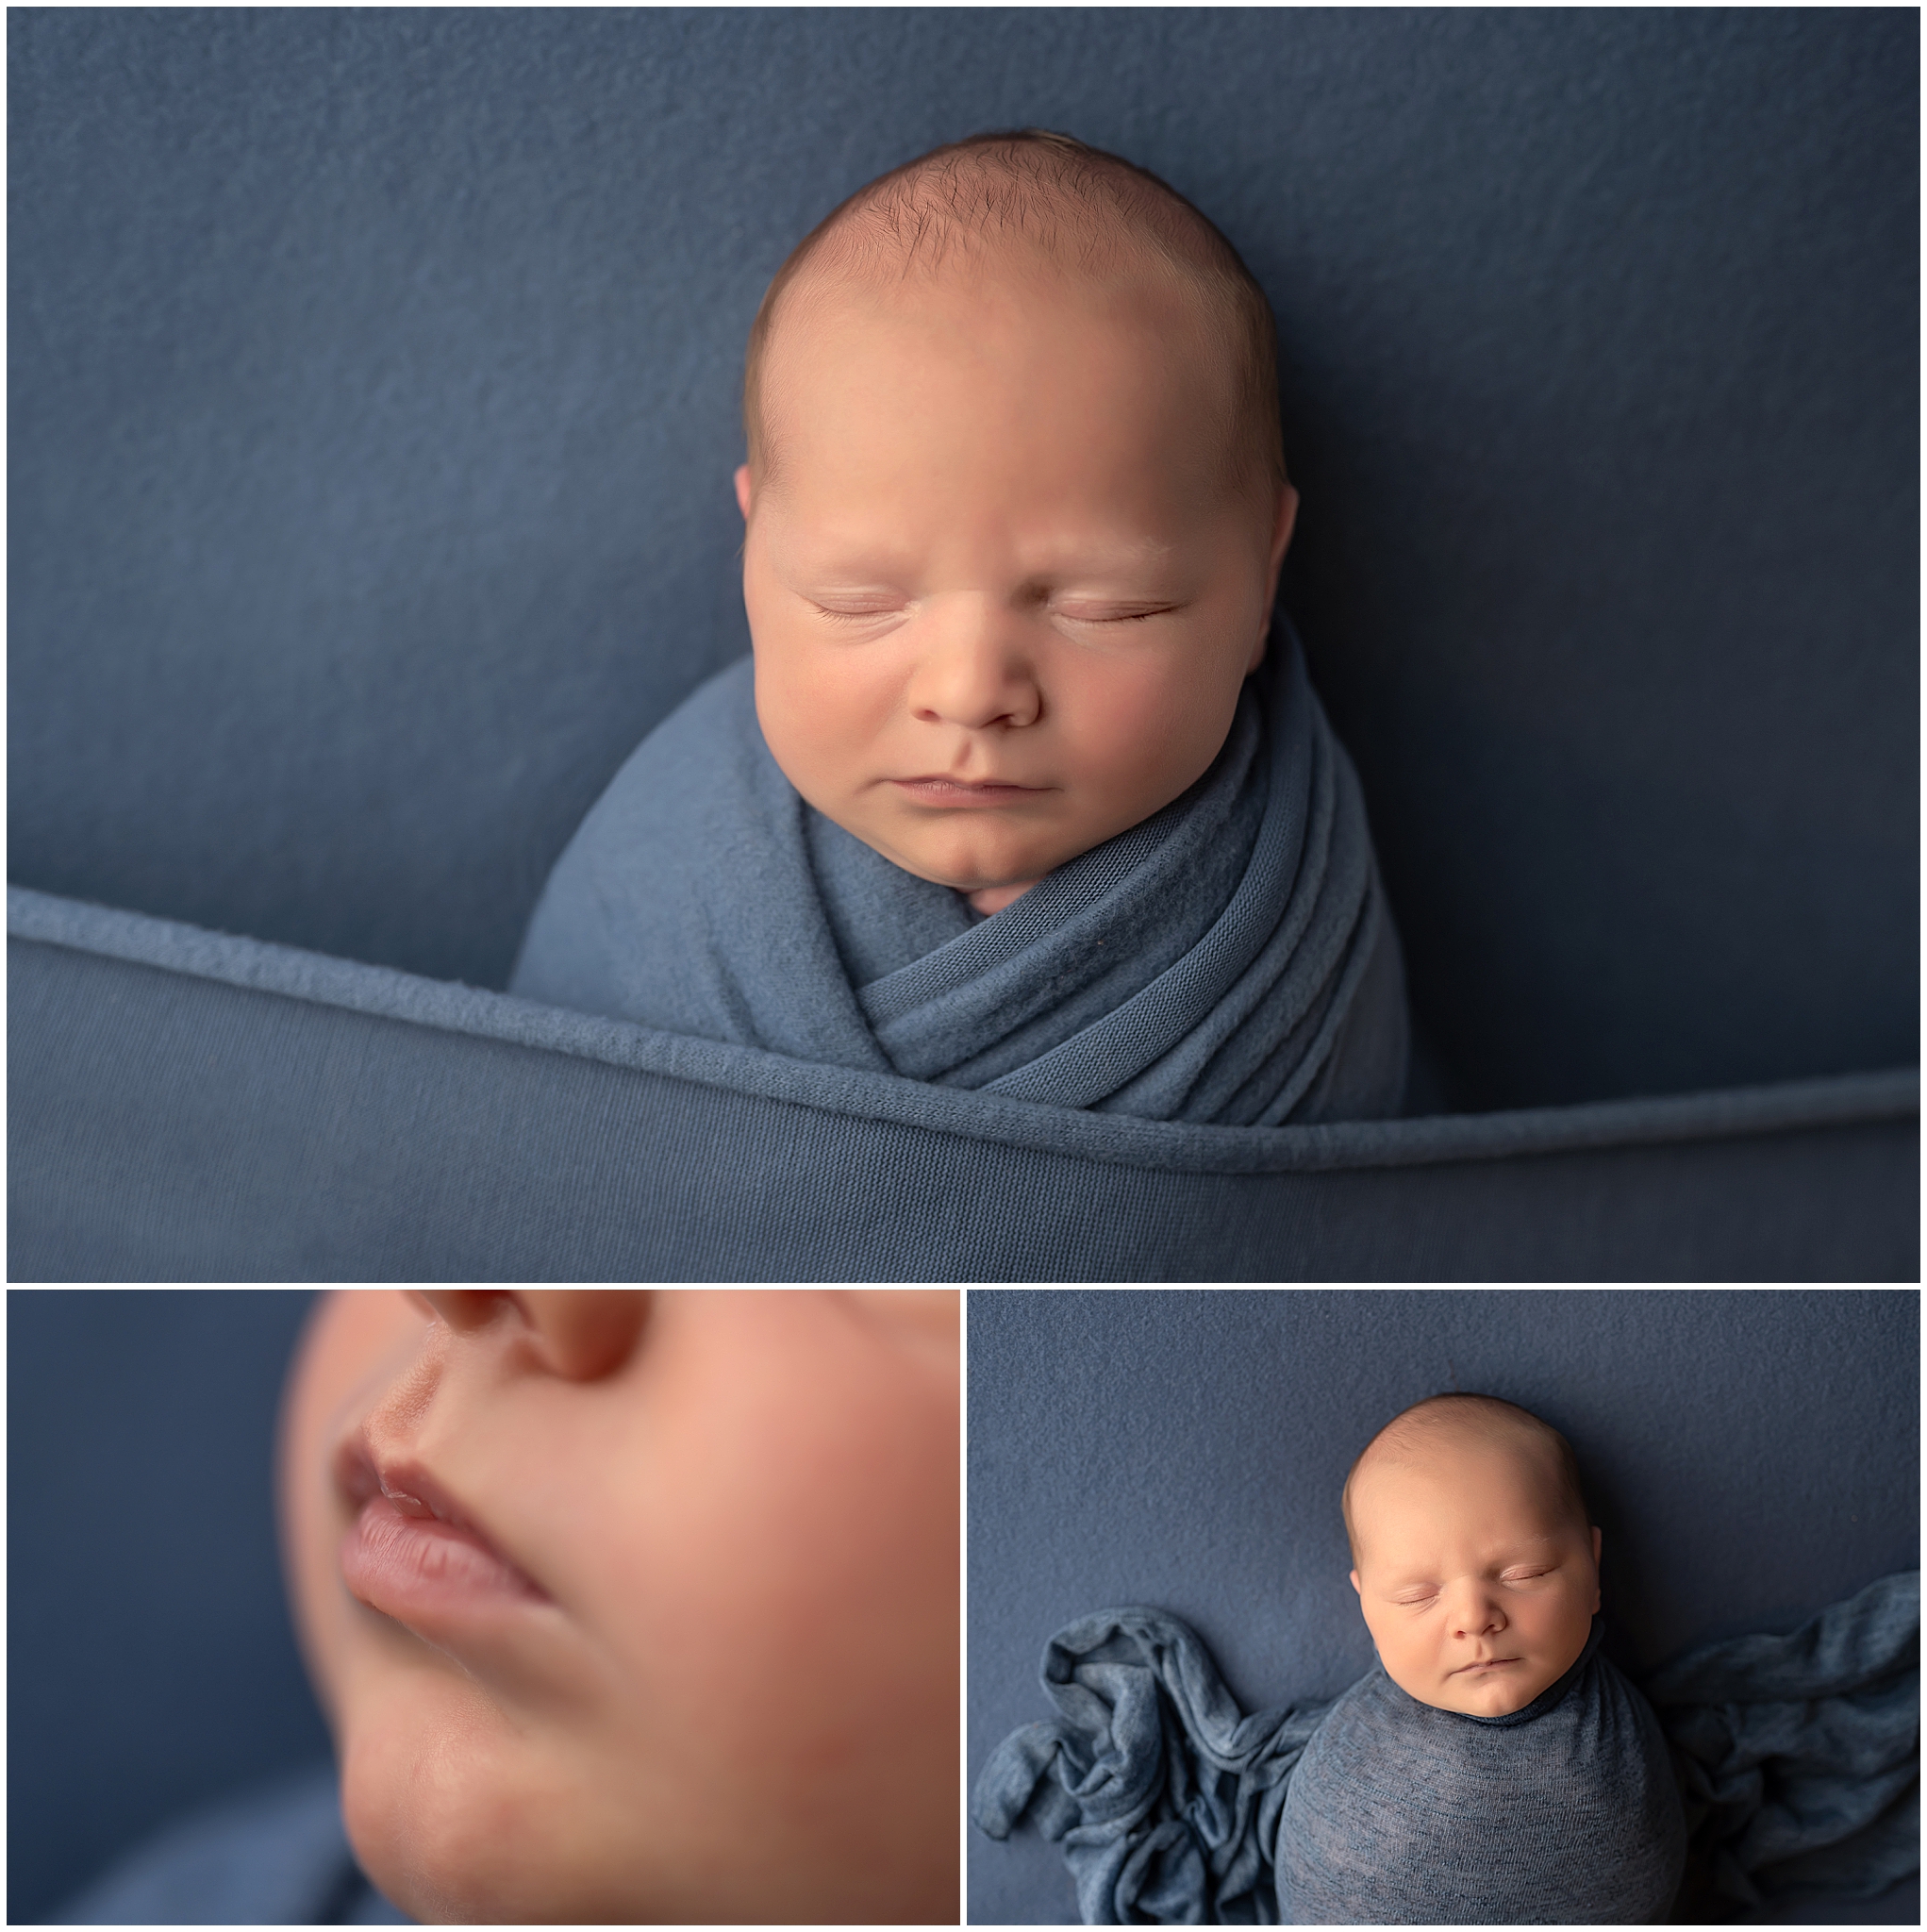 baby sleeping on blue fabric during newborn photography session in london ontario